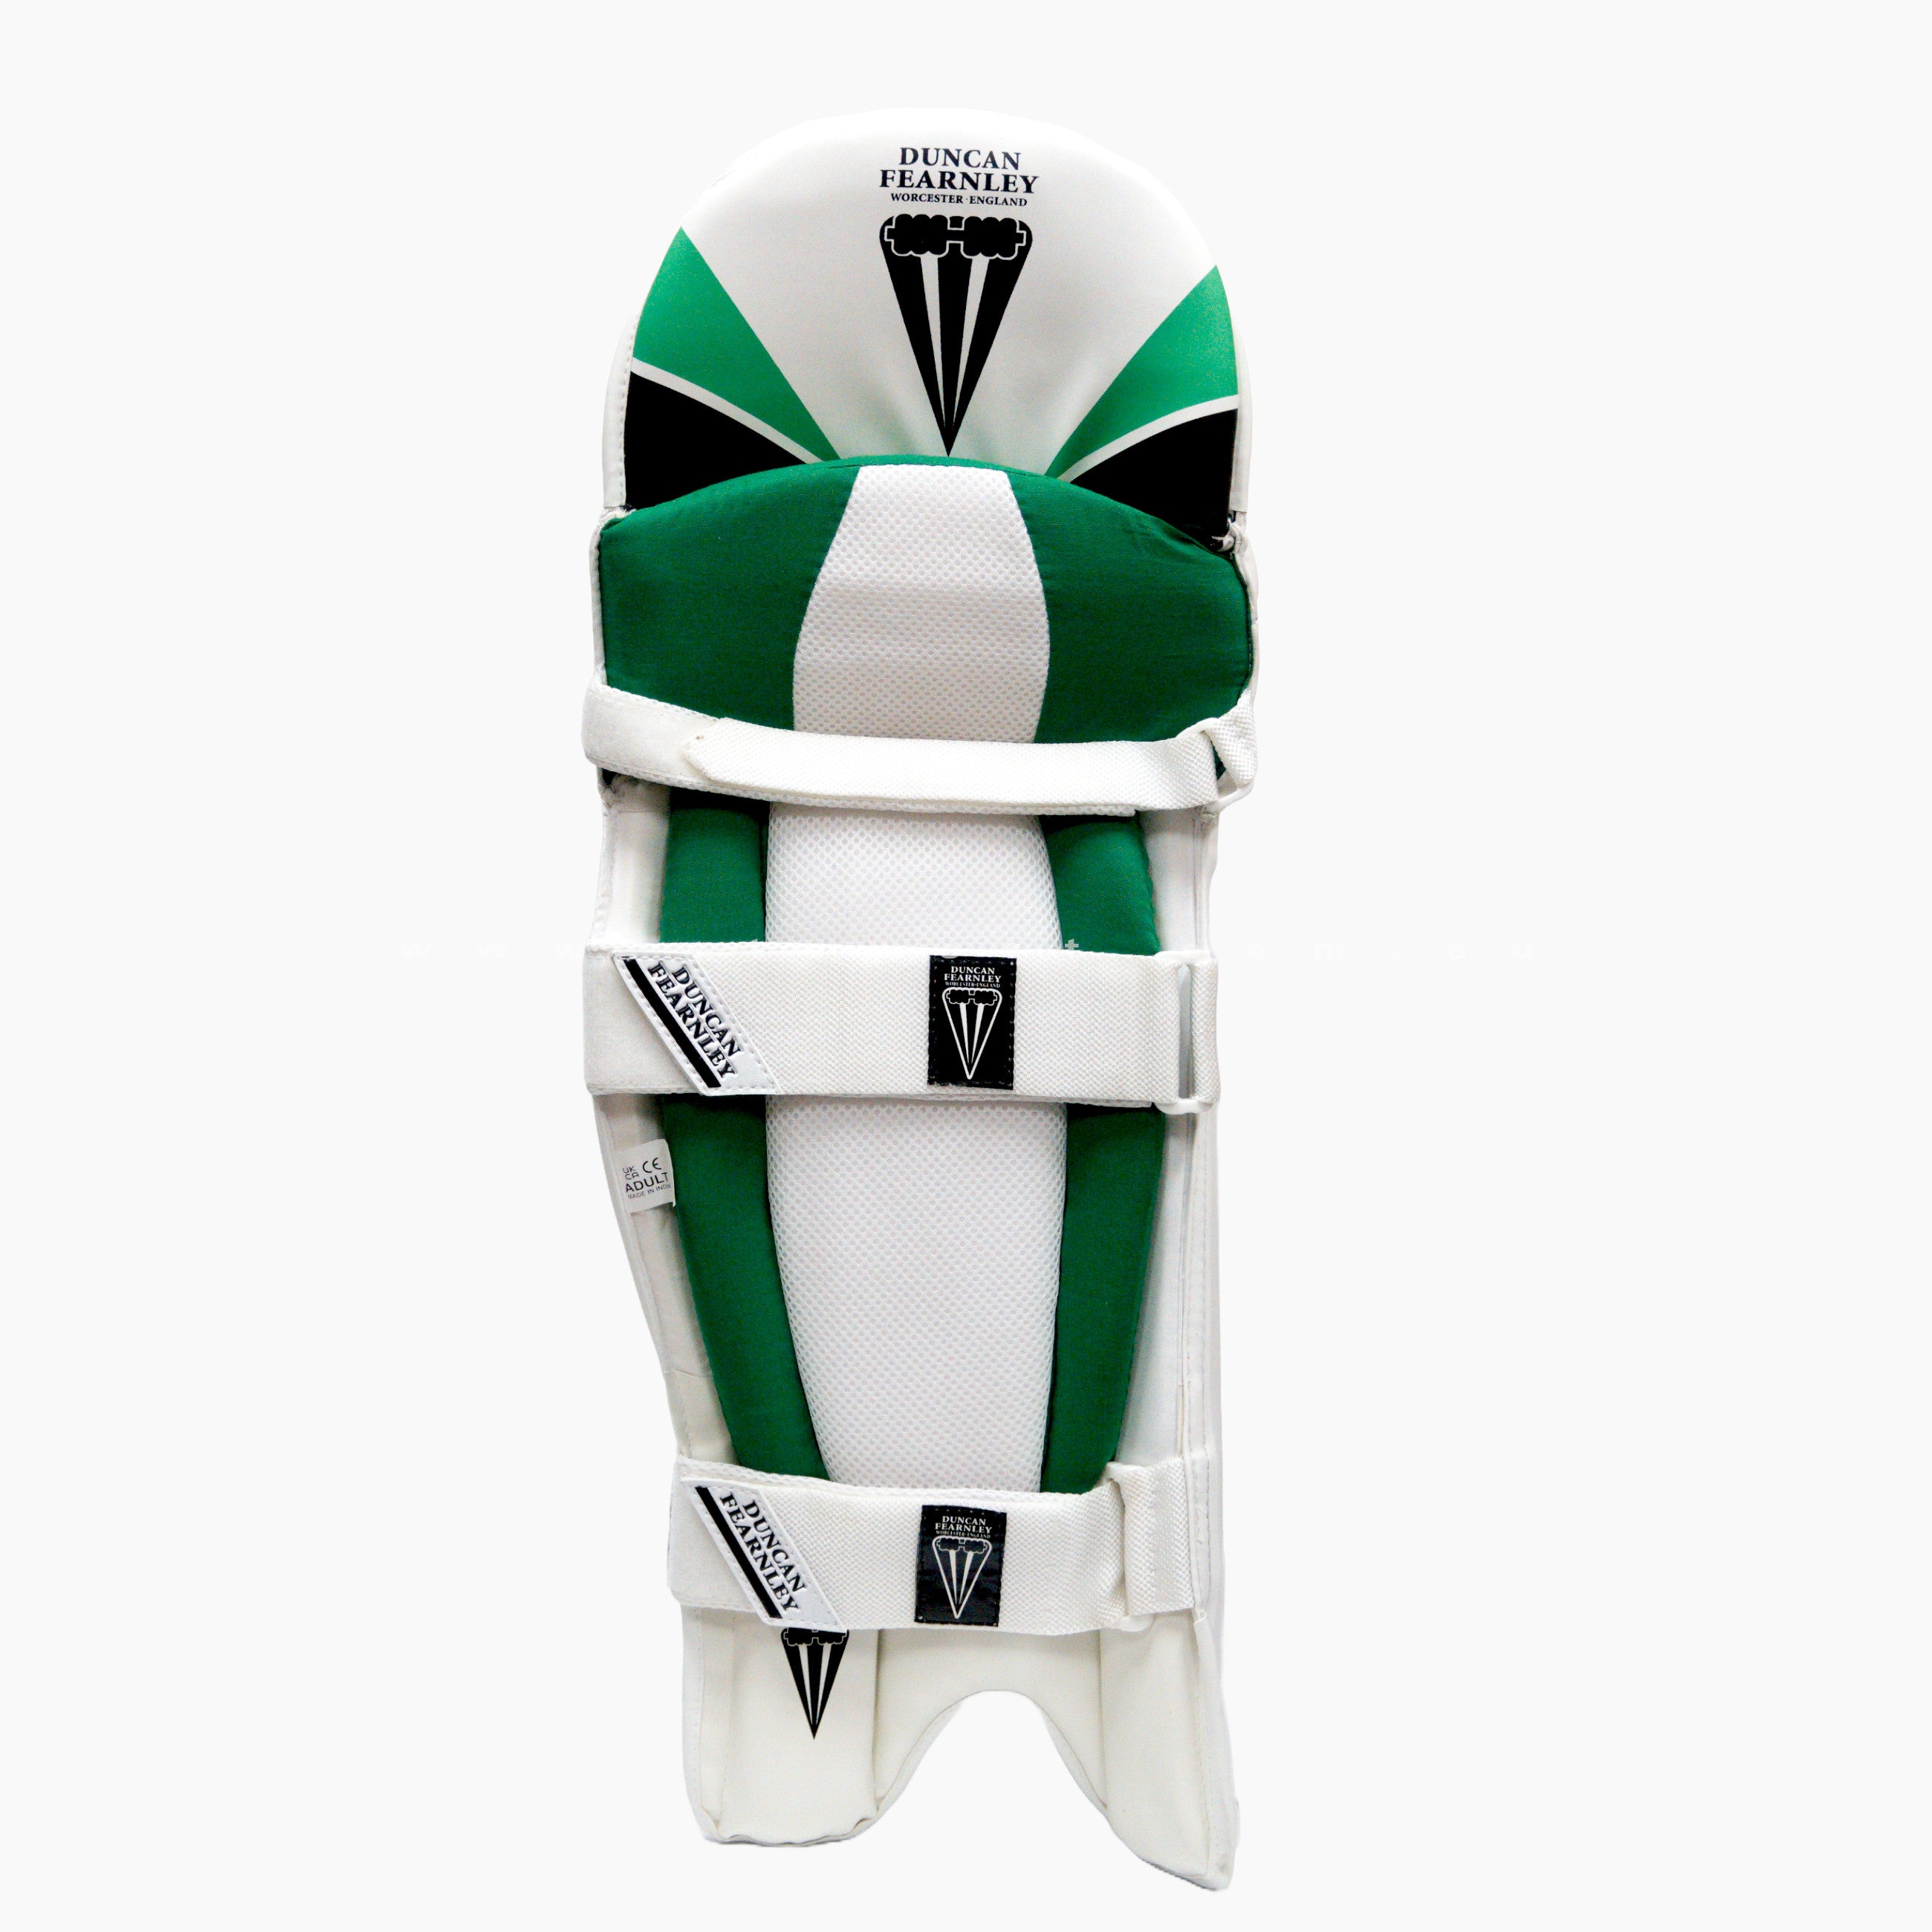 Duncan Fearnley Magnum Cricket Batting Pads - YOUTH